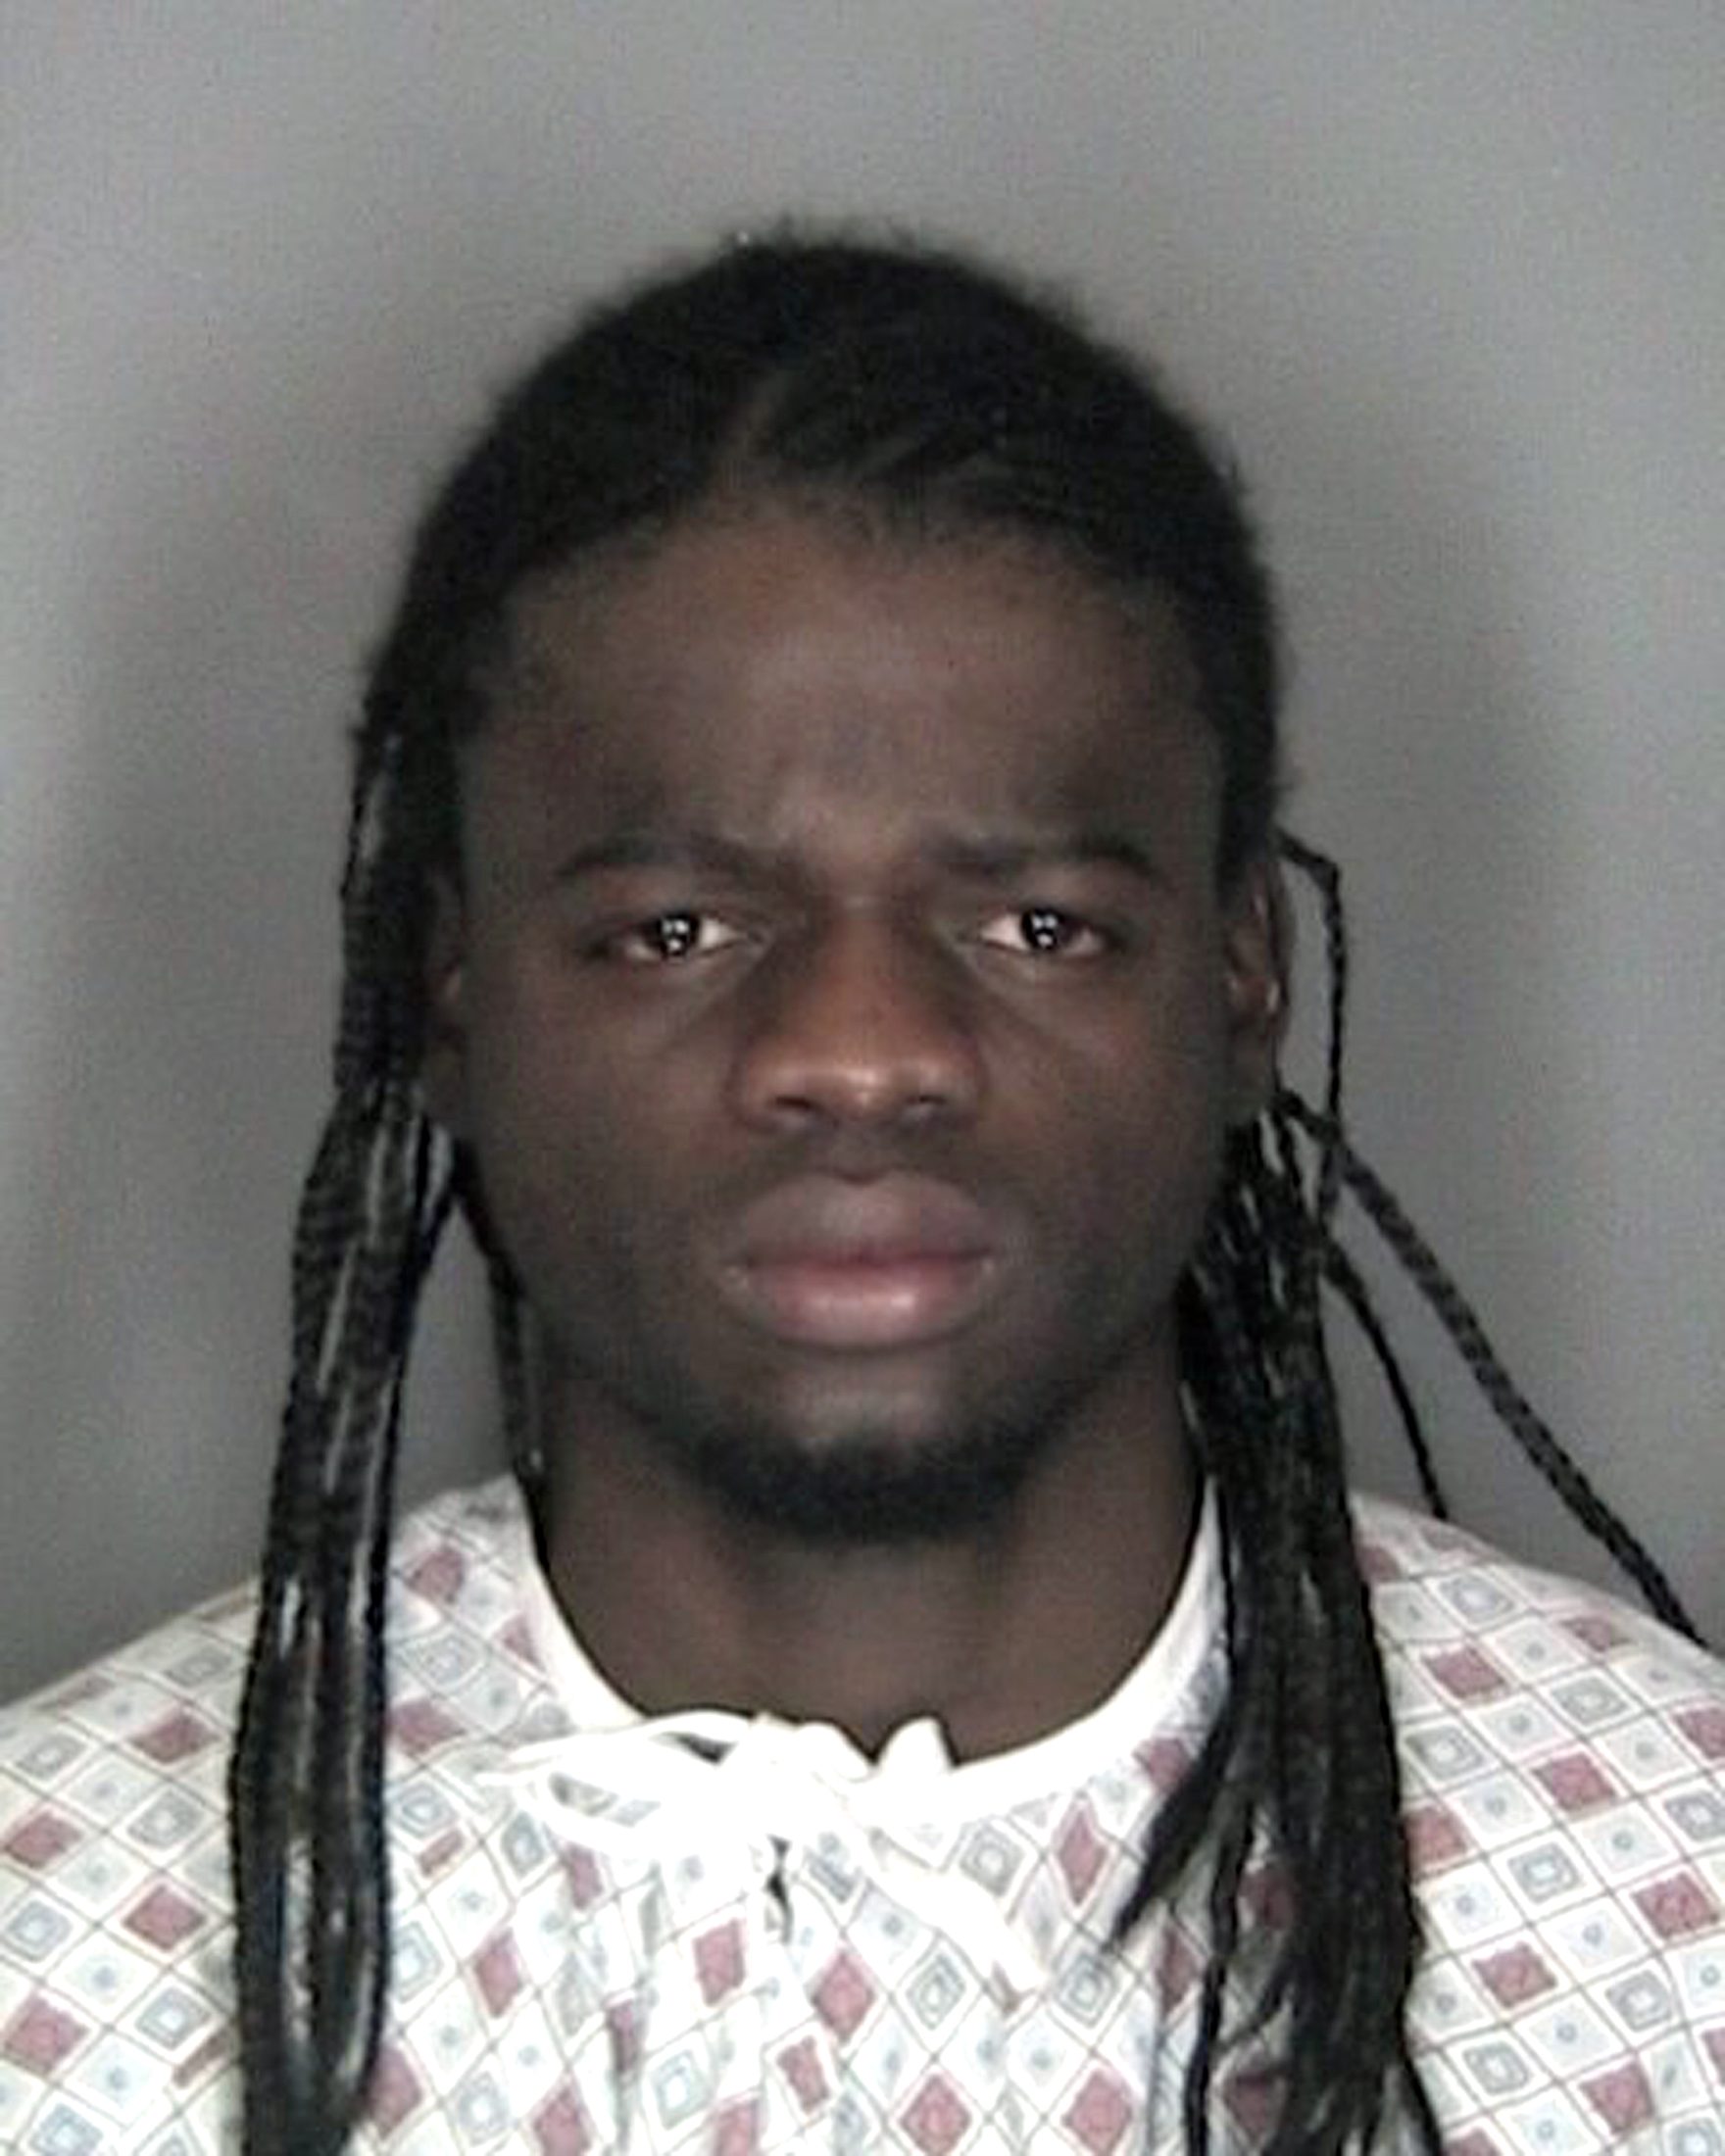 PHOTO: Suspect Daron Dylon Wint is pictured in this 2007 police booking photograph released on May 22, 2015.